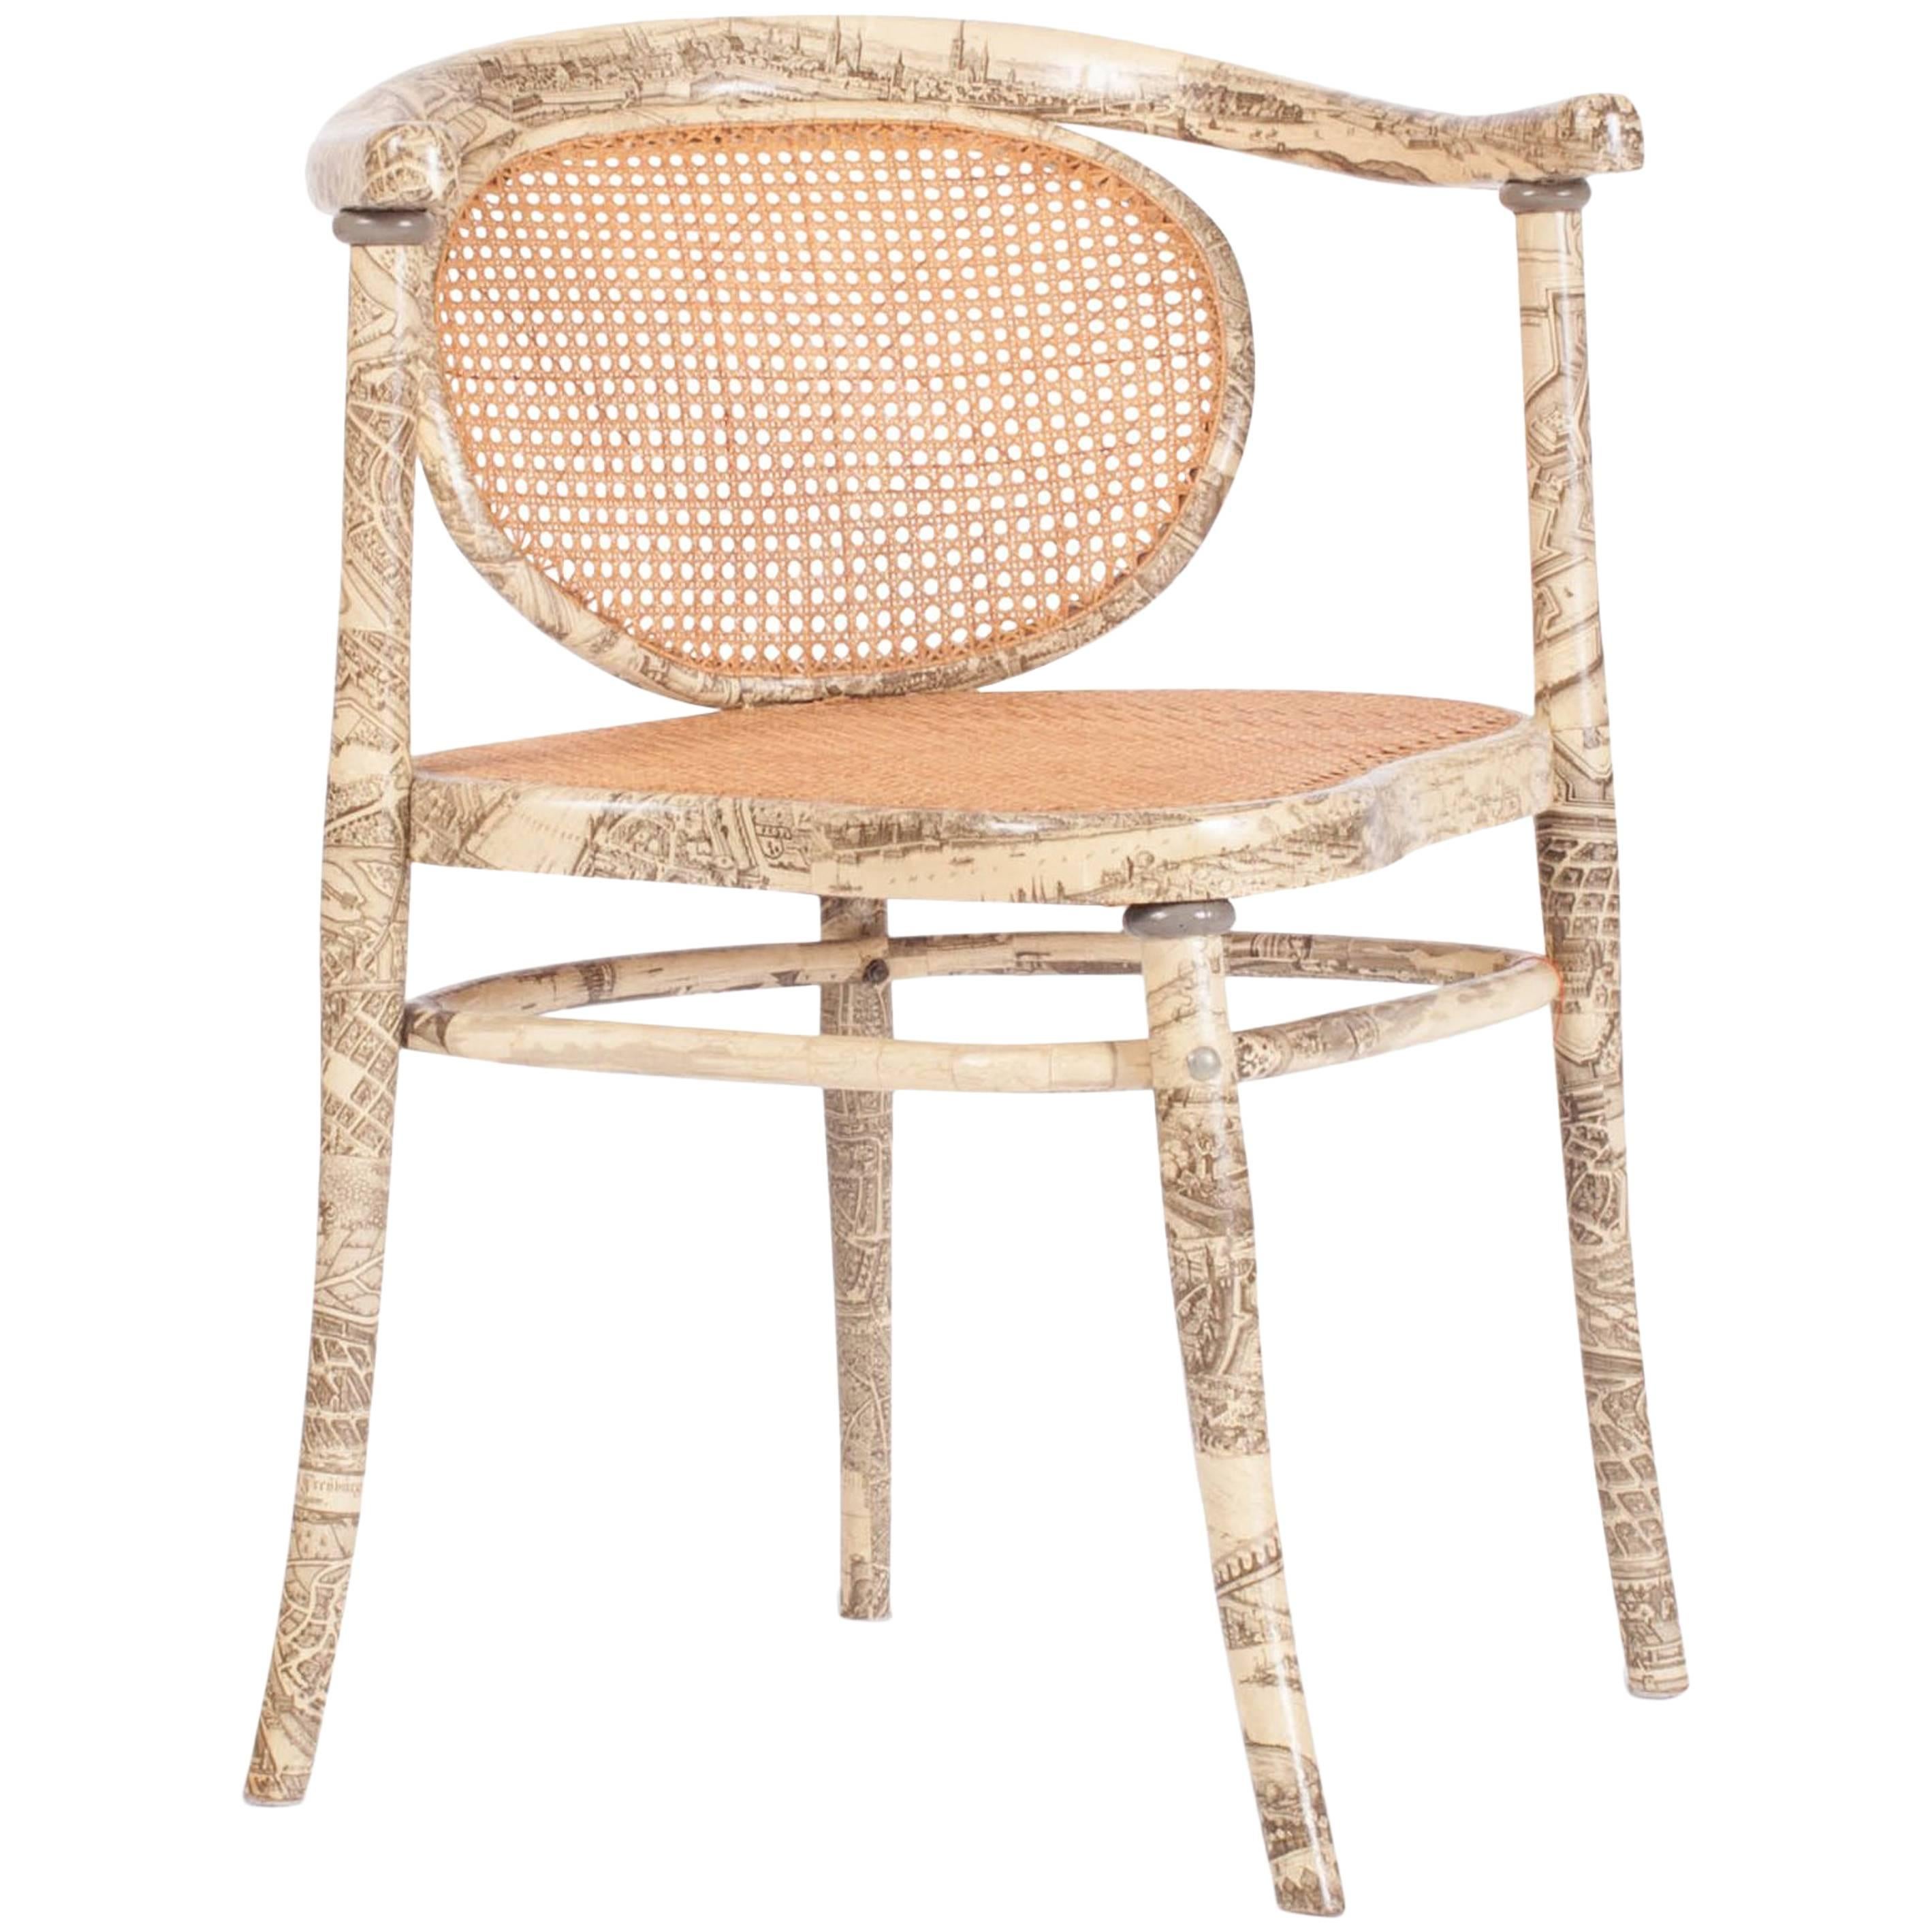 Thonet armchair with a printed illustration. 

The seat and backrest are weaved in rattan. The rest of the frame is covered in a print
that could have influenced by the great Fornasetti. The chair is marked on the inside of the seat.

Europe,